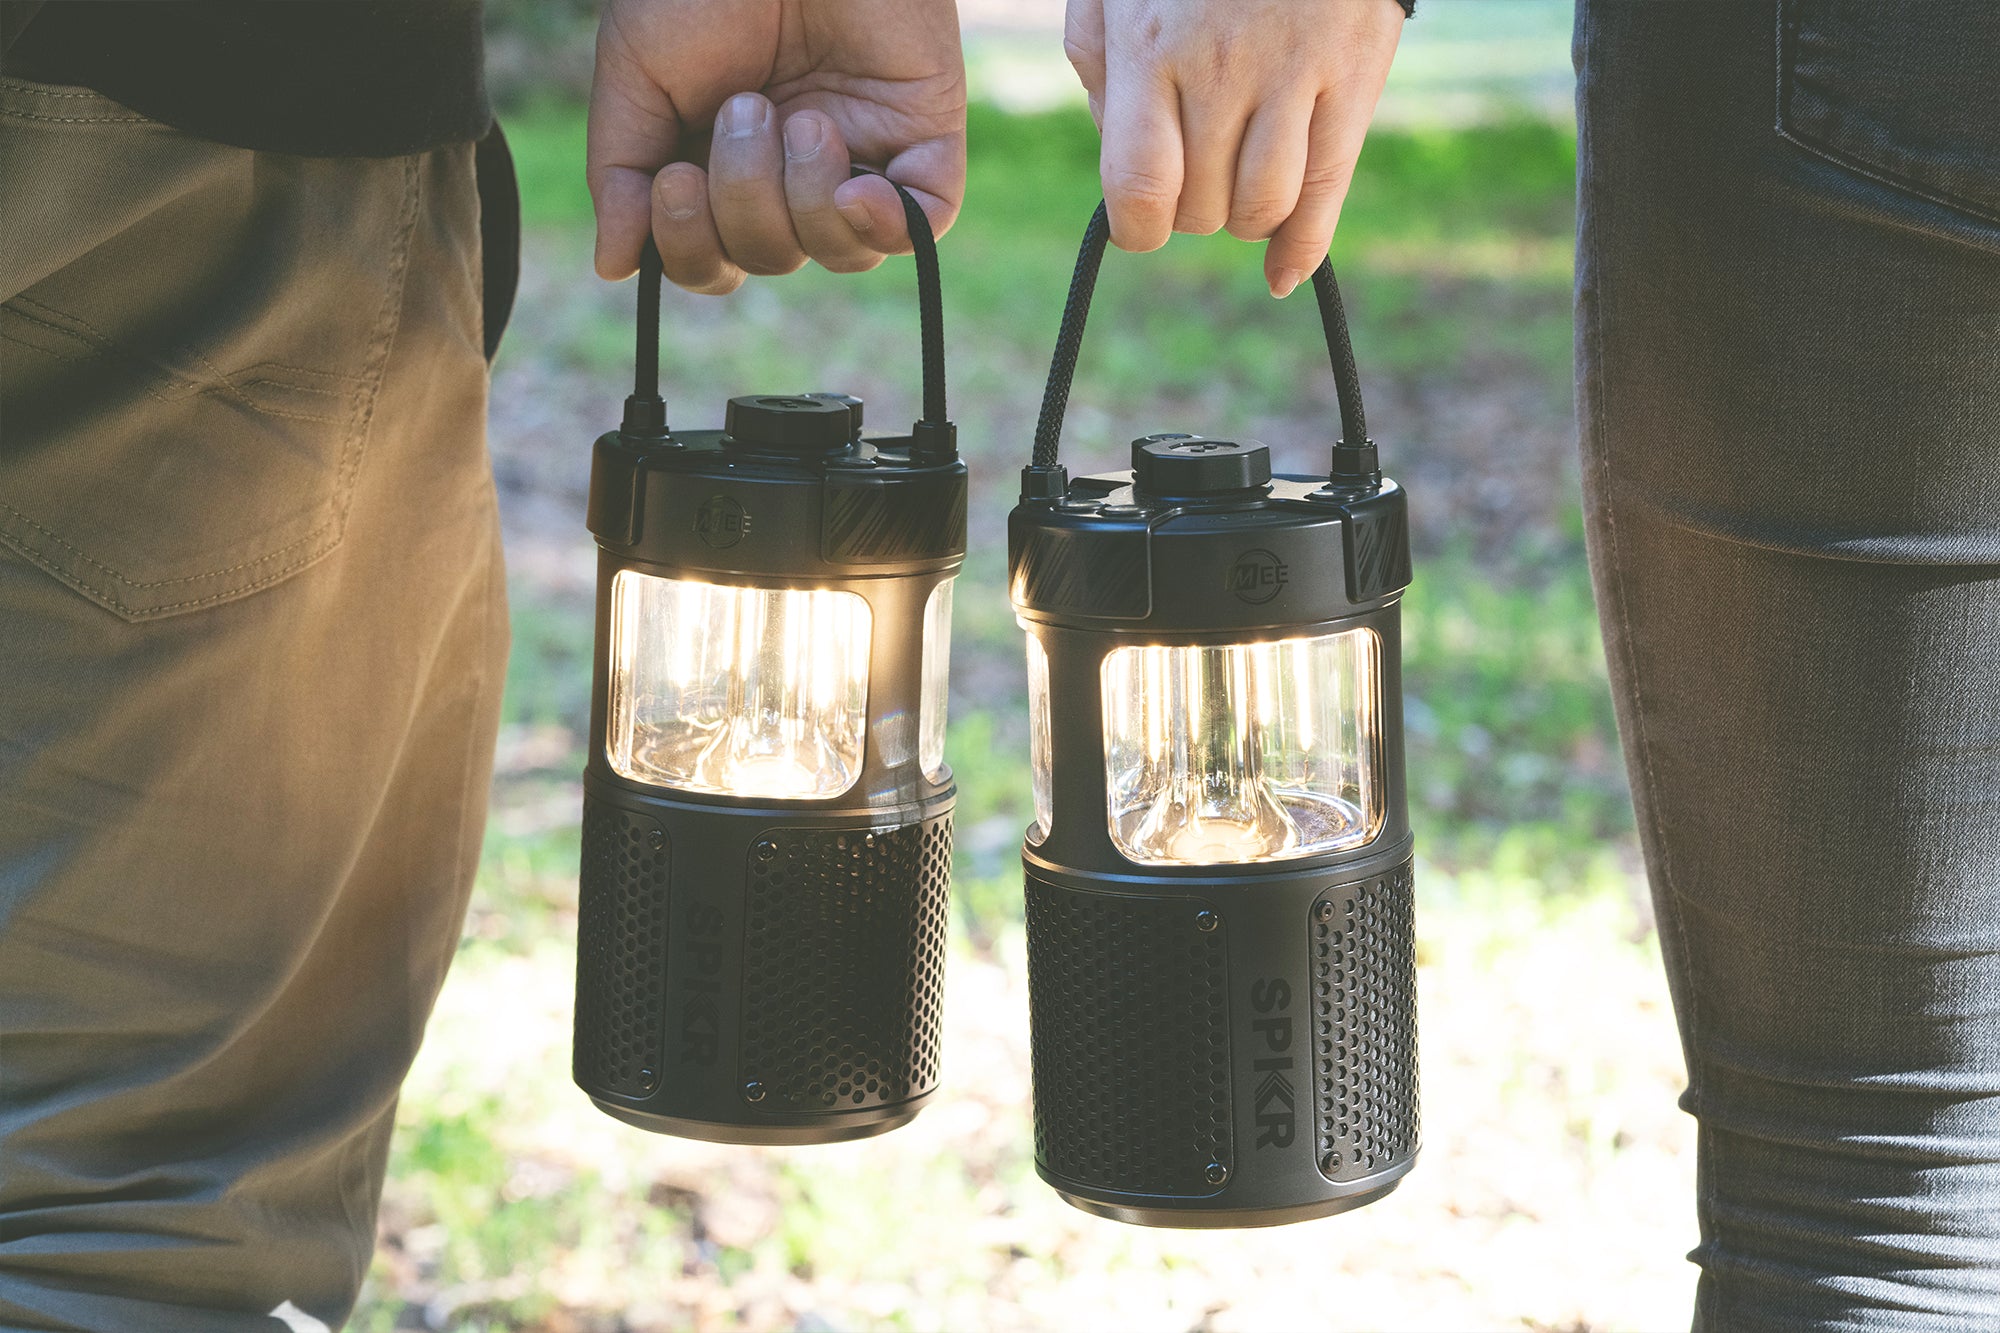 Two people standing outdoors, each holding a portable led camping lantern by the handle, showcasing the design and functionality of the lanterns in a natural setting.